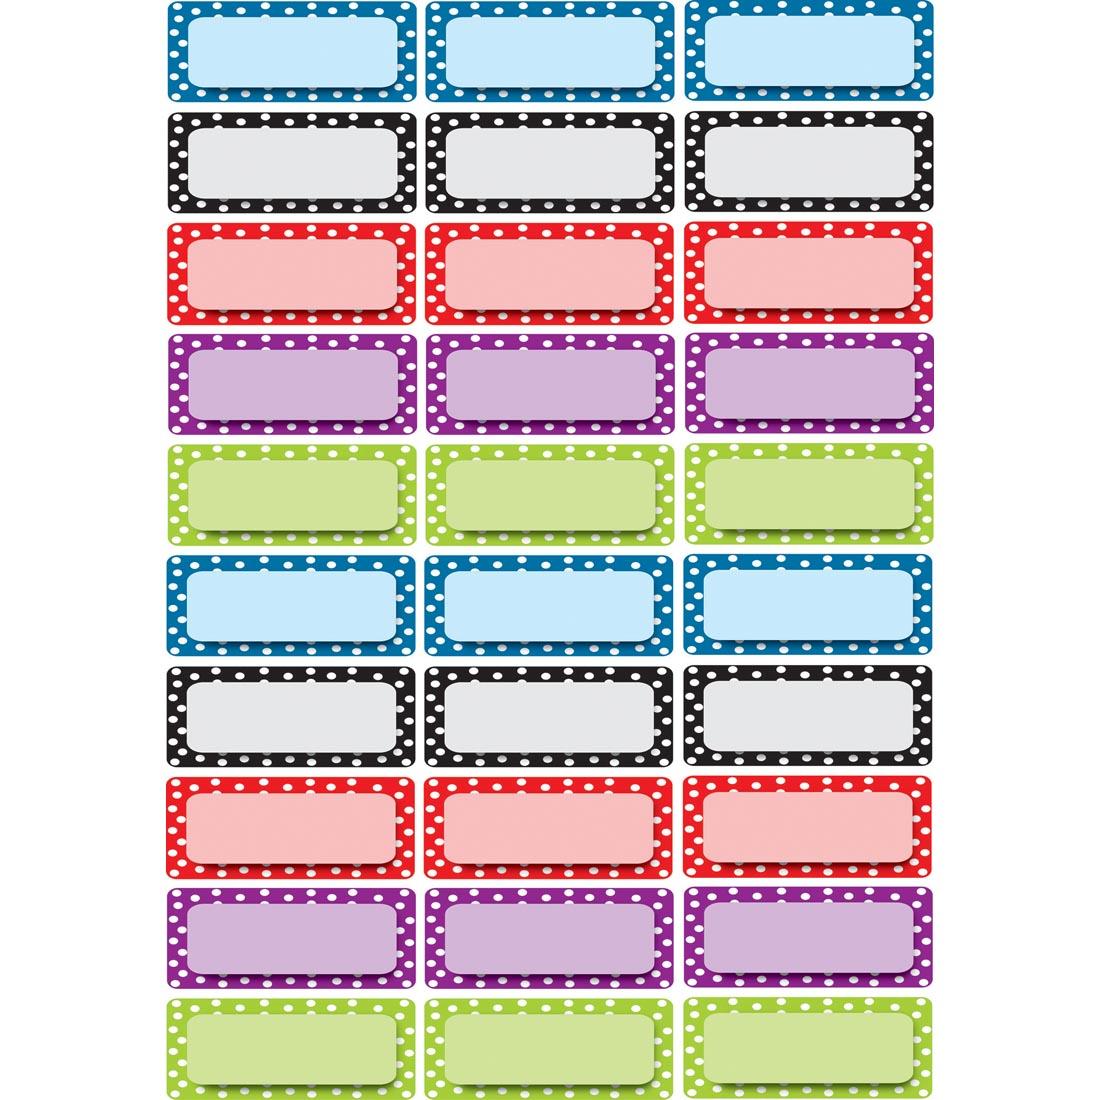 magnetic sheet of mini labels with colorful polka-dot borders